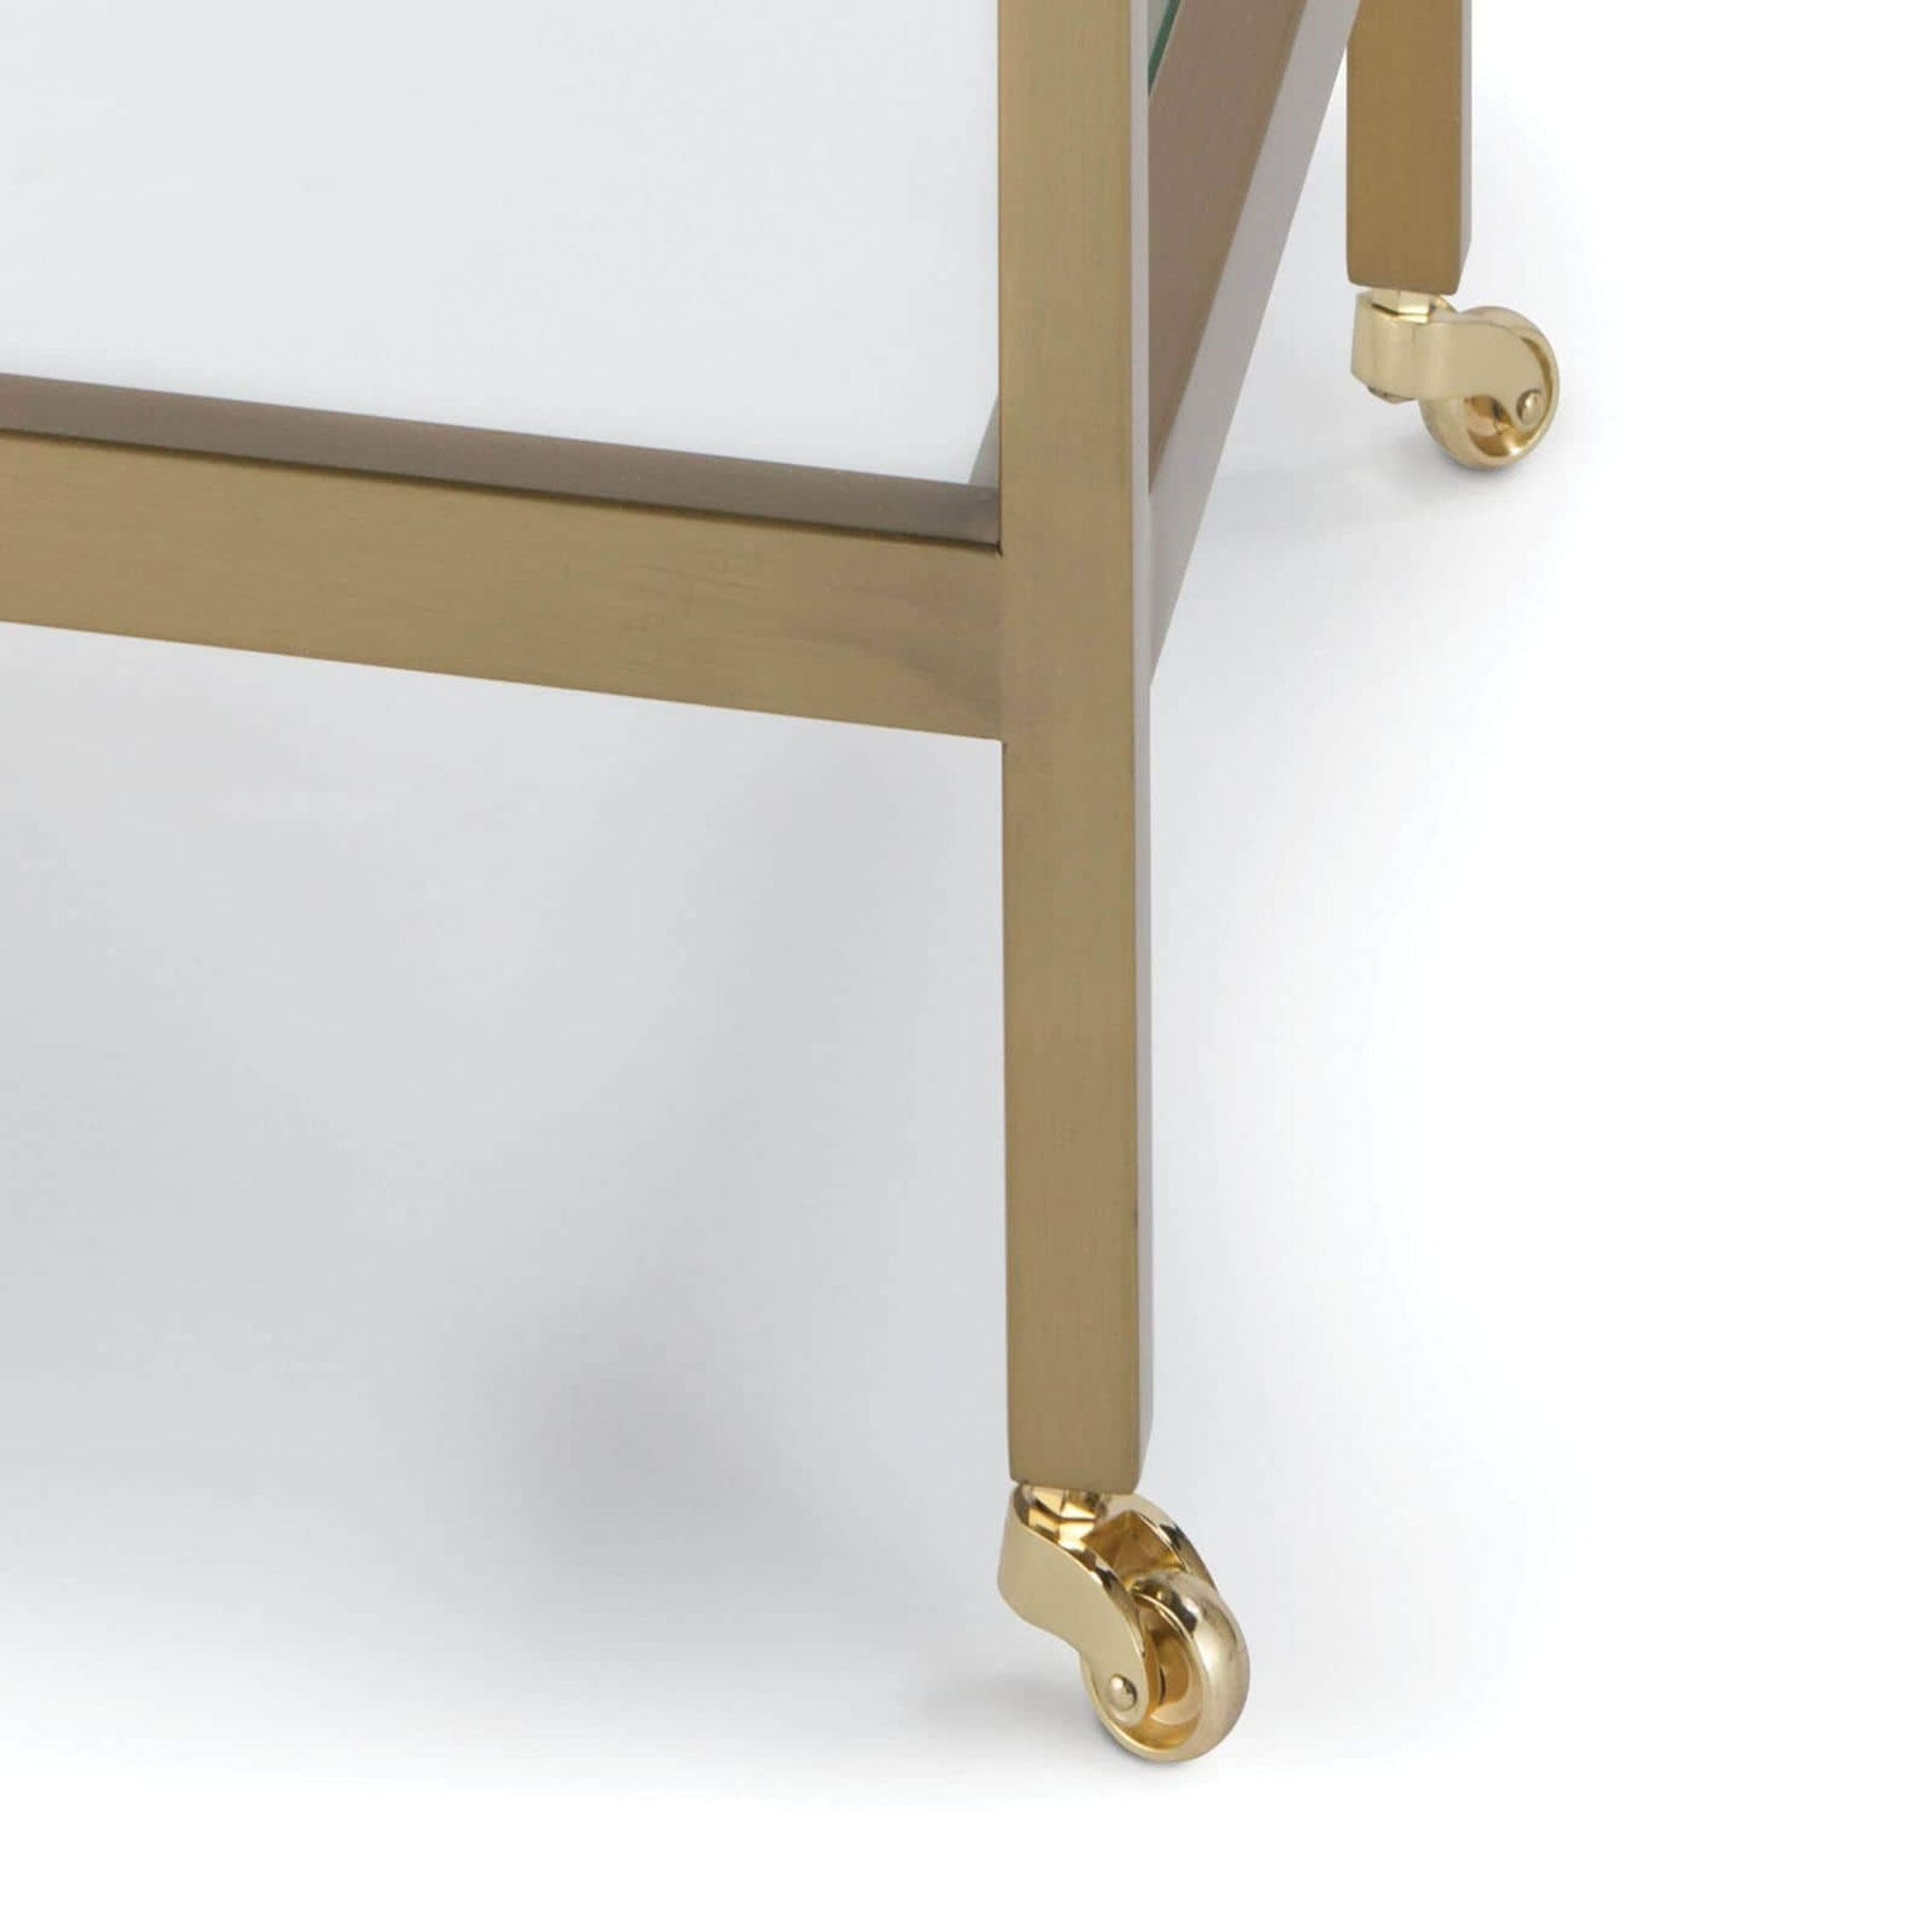 Attalee Three-Tiered Side Table